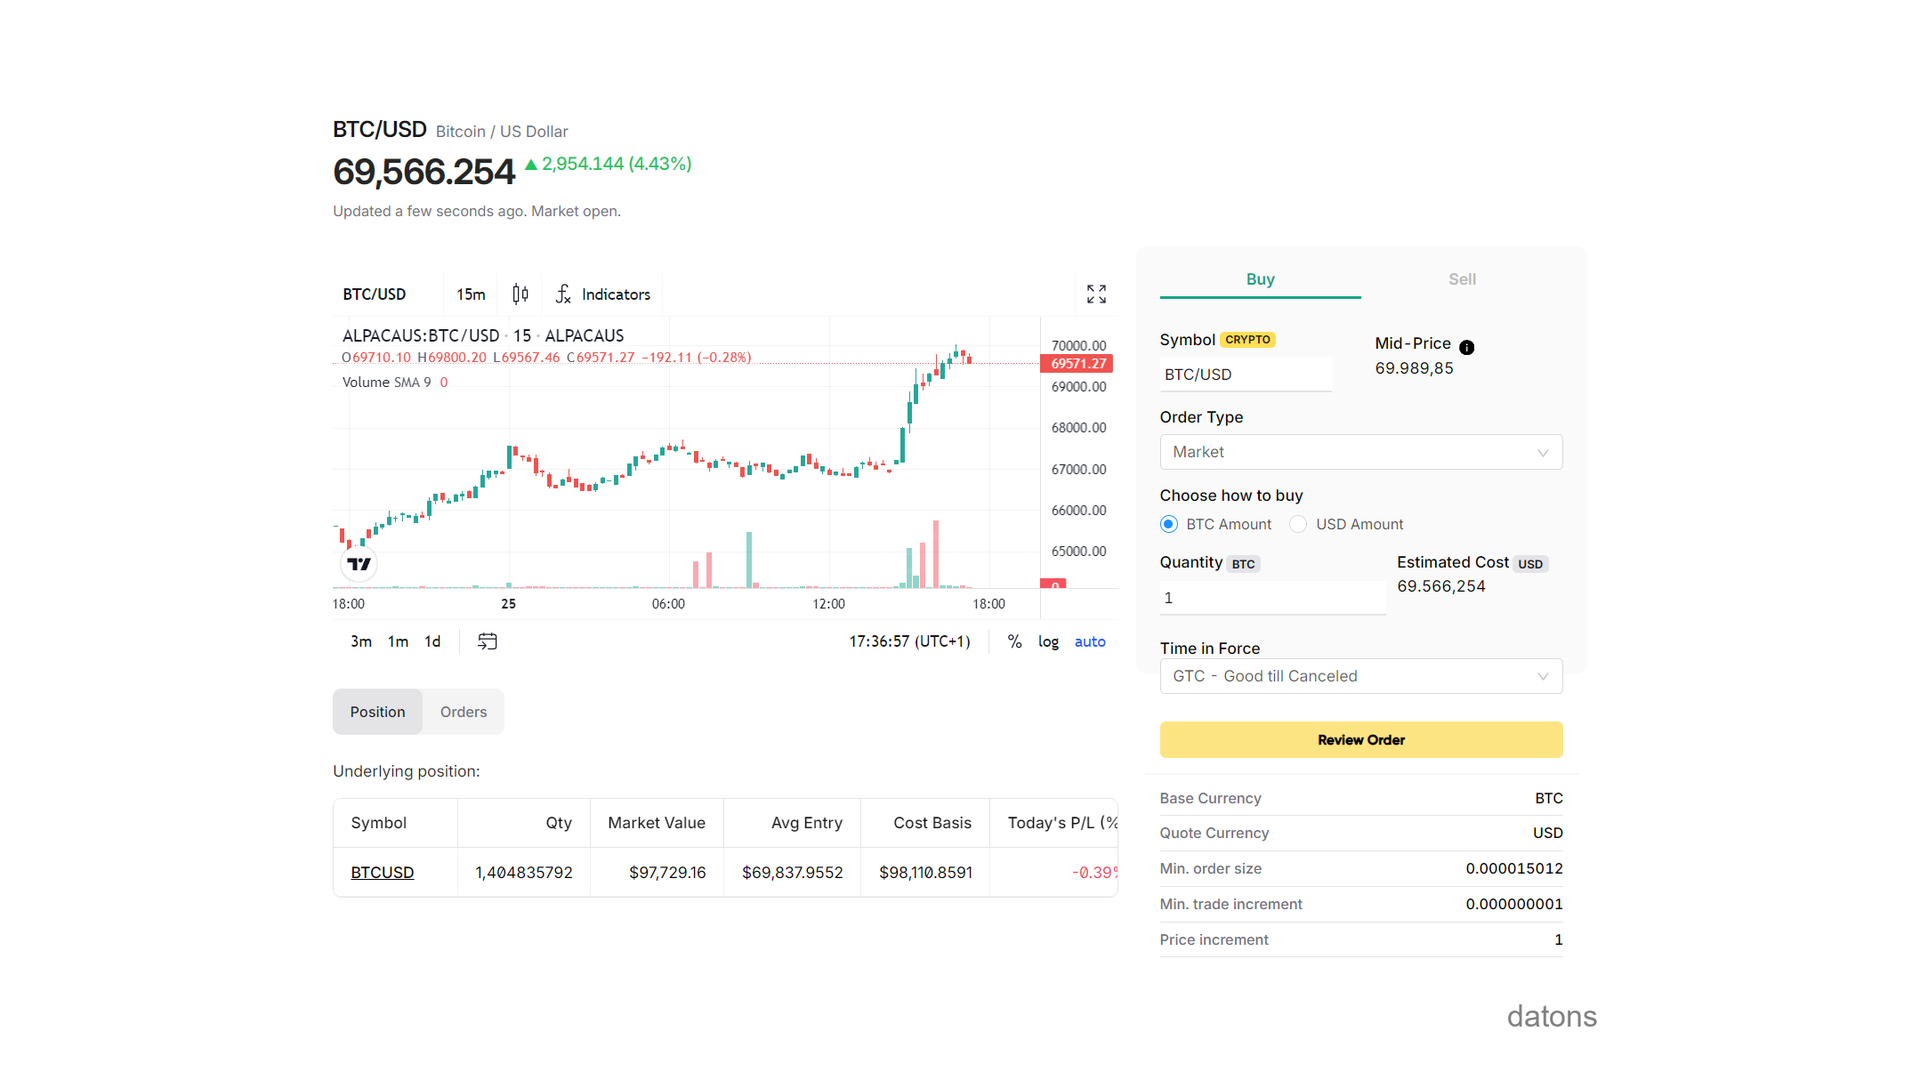 Trading platform screen showing a buy order for Bitcoin with details such as the symbol BTCUSD and the amount invested.